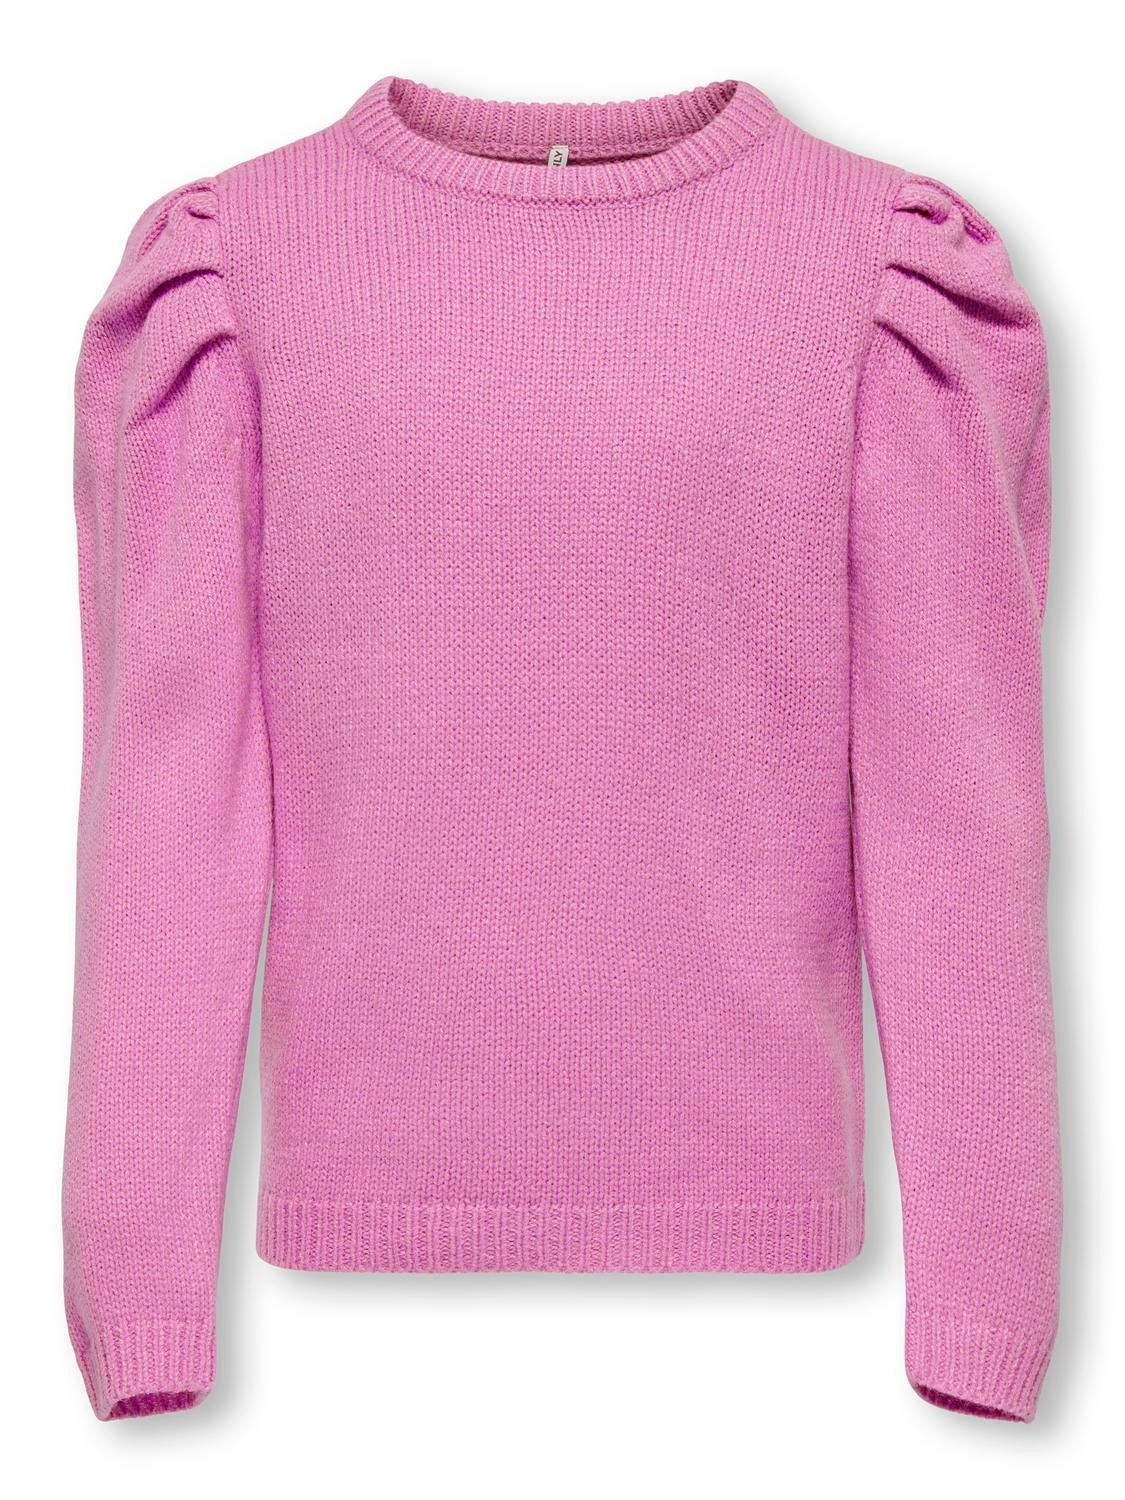 ONLY o-neck knitted pullover with puff sleeves -Moonlite Mauve - 15306862